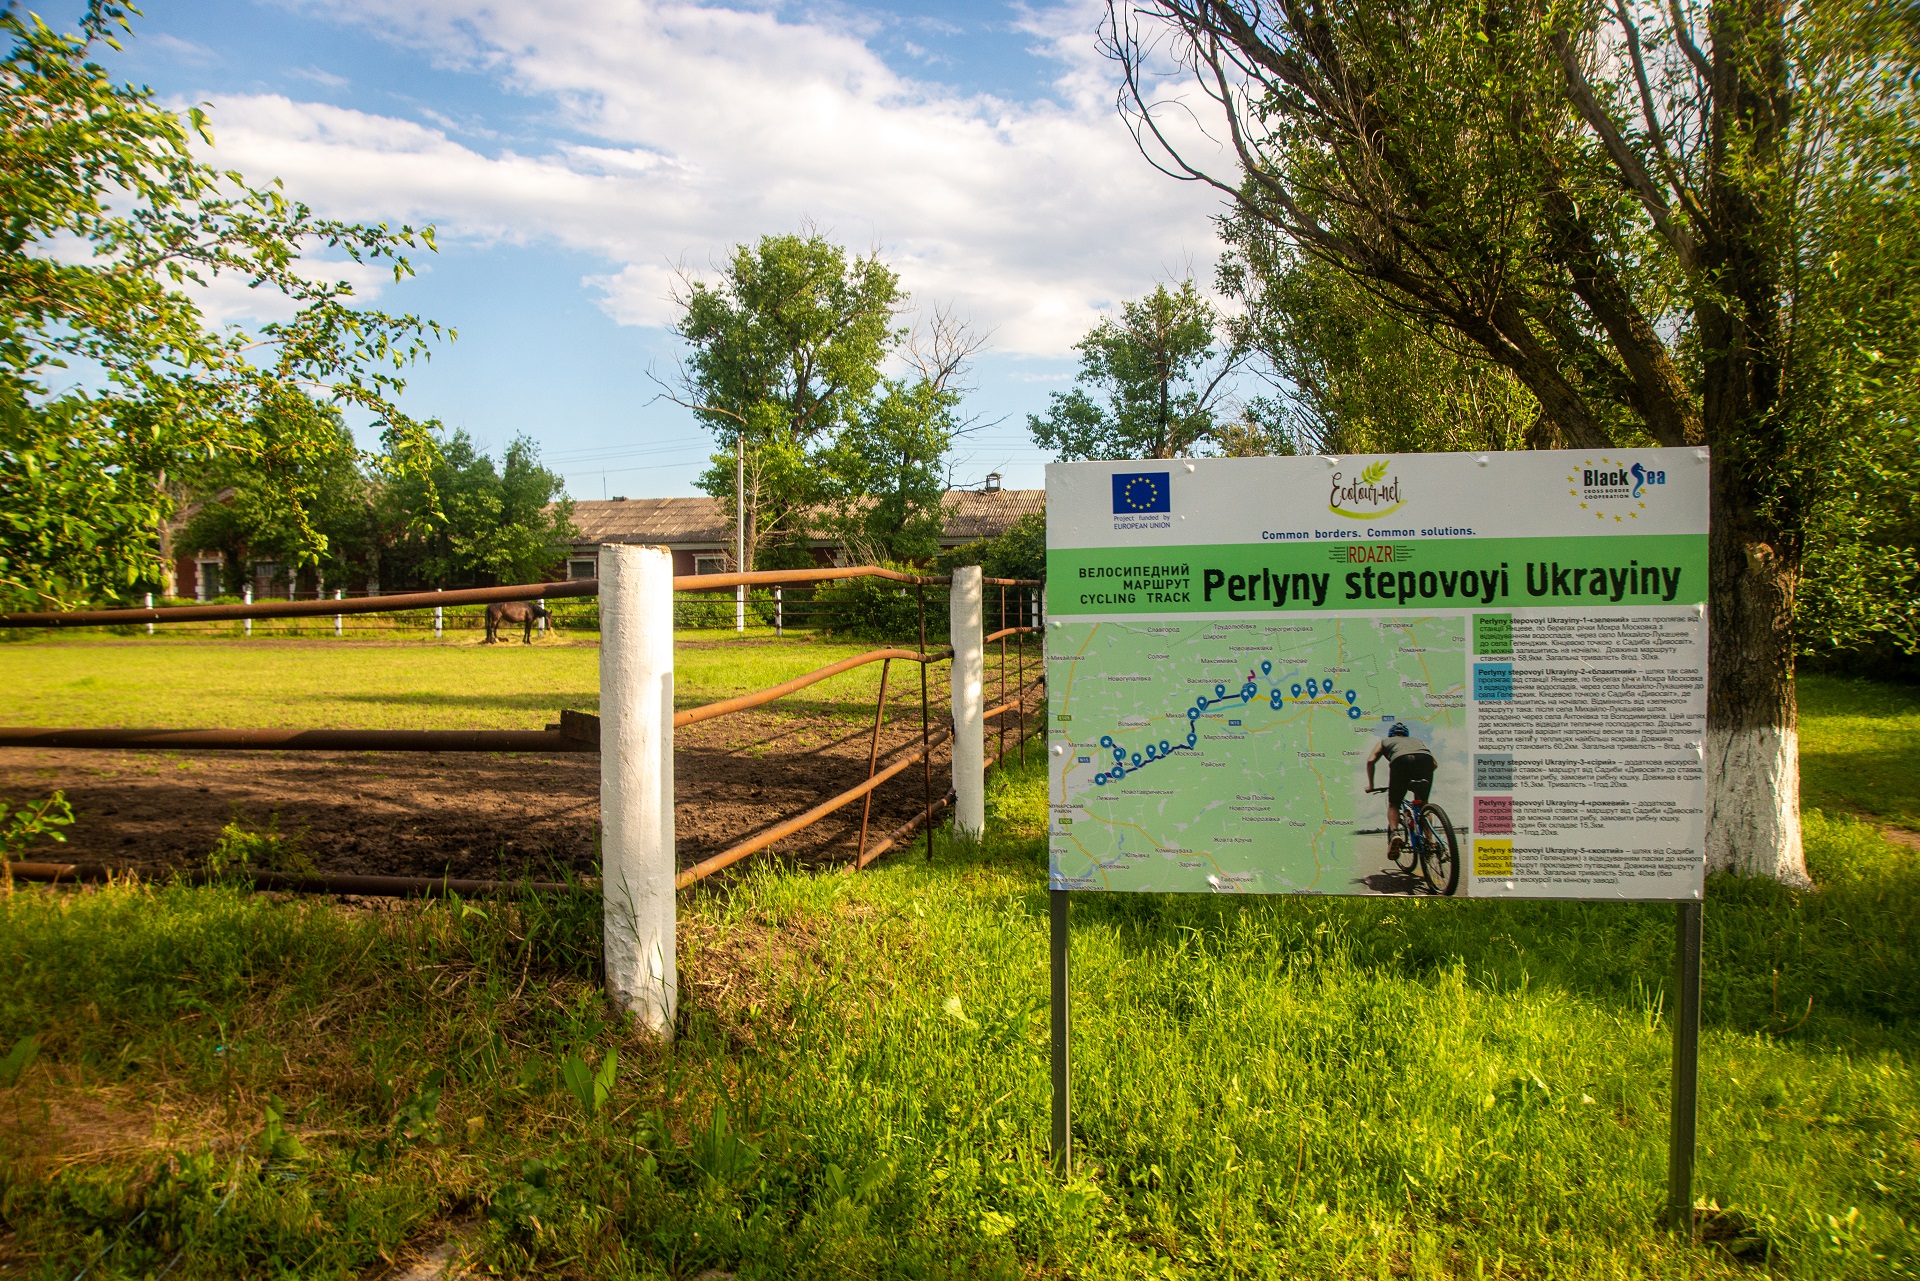 The Perlyny Stepovoyi Ukrayiny Two Day Cycling Route Overview